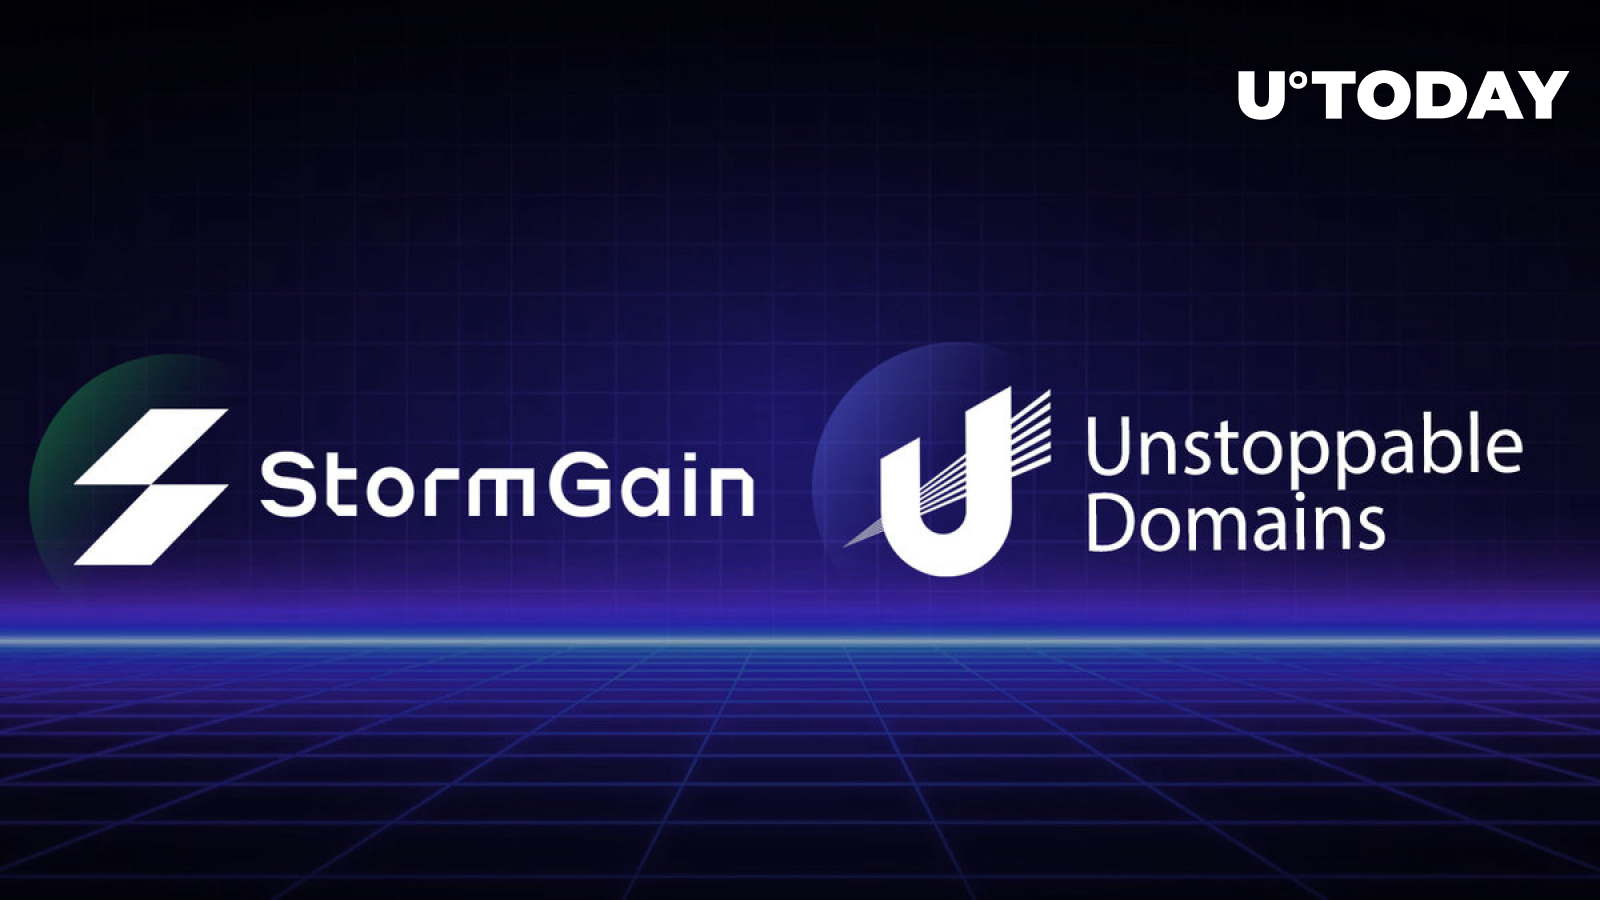 StormGain Trading Platform Partners With Unstoppable Domains, Announces Promo Campaign